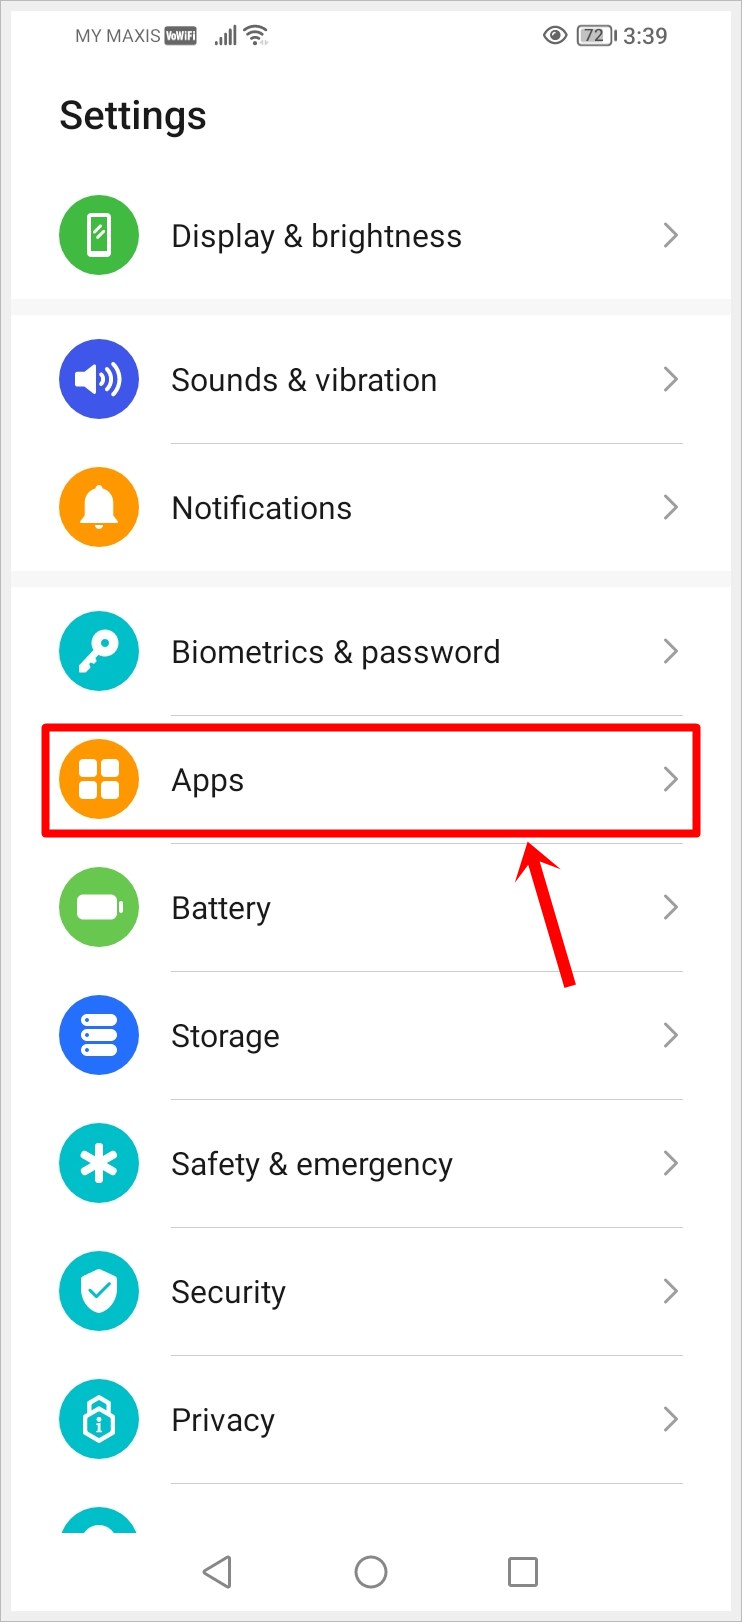 This image shows the Settings screen of an Android phone, with the Apps option highlighted.